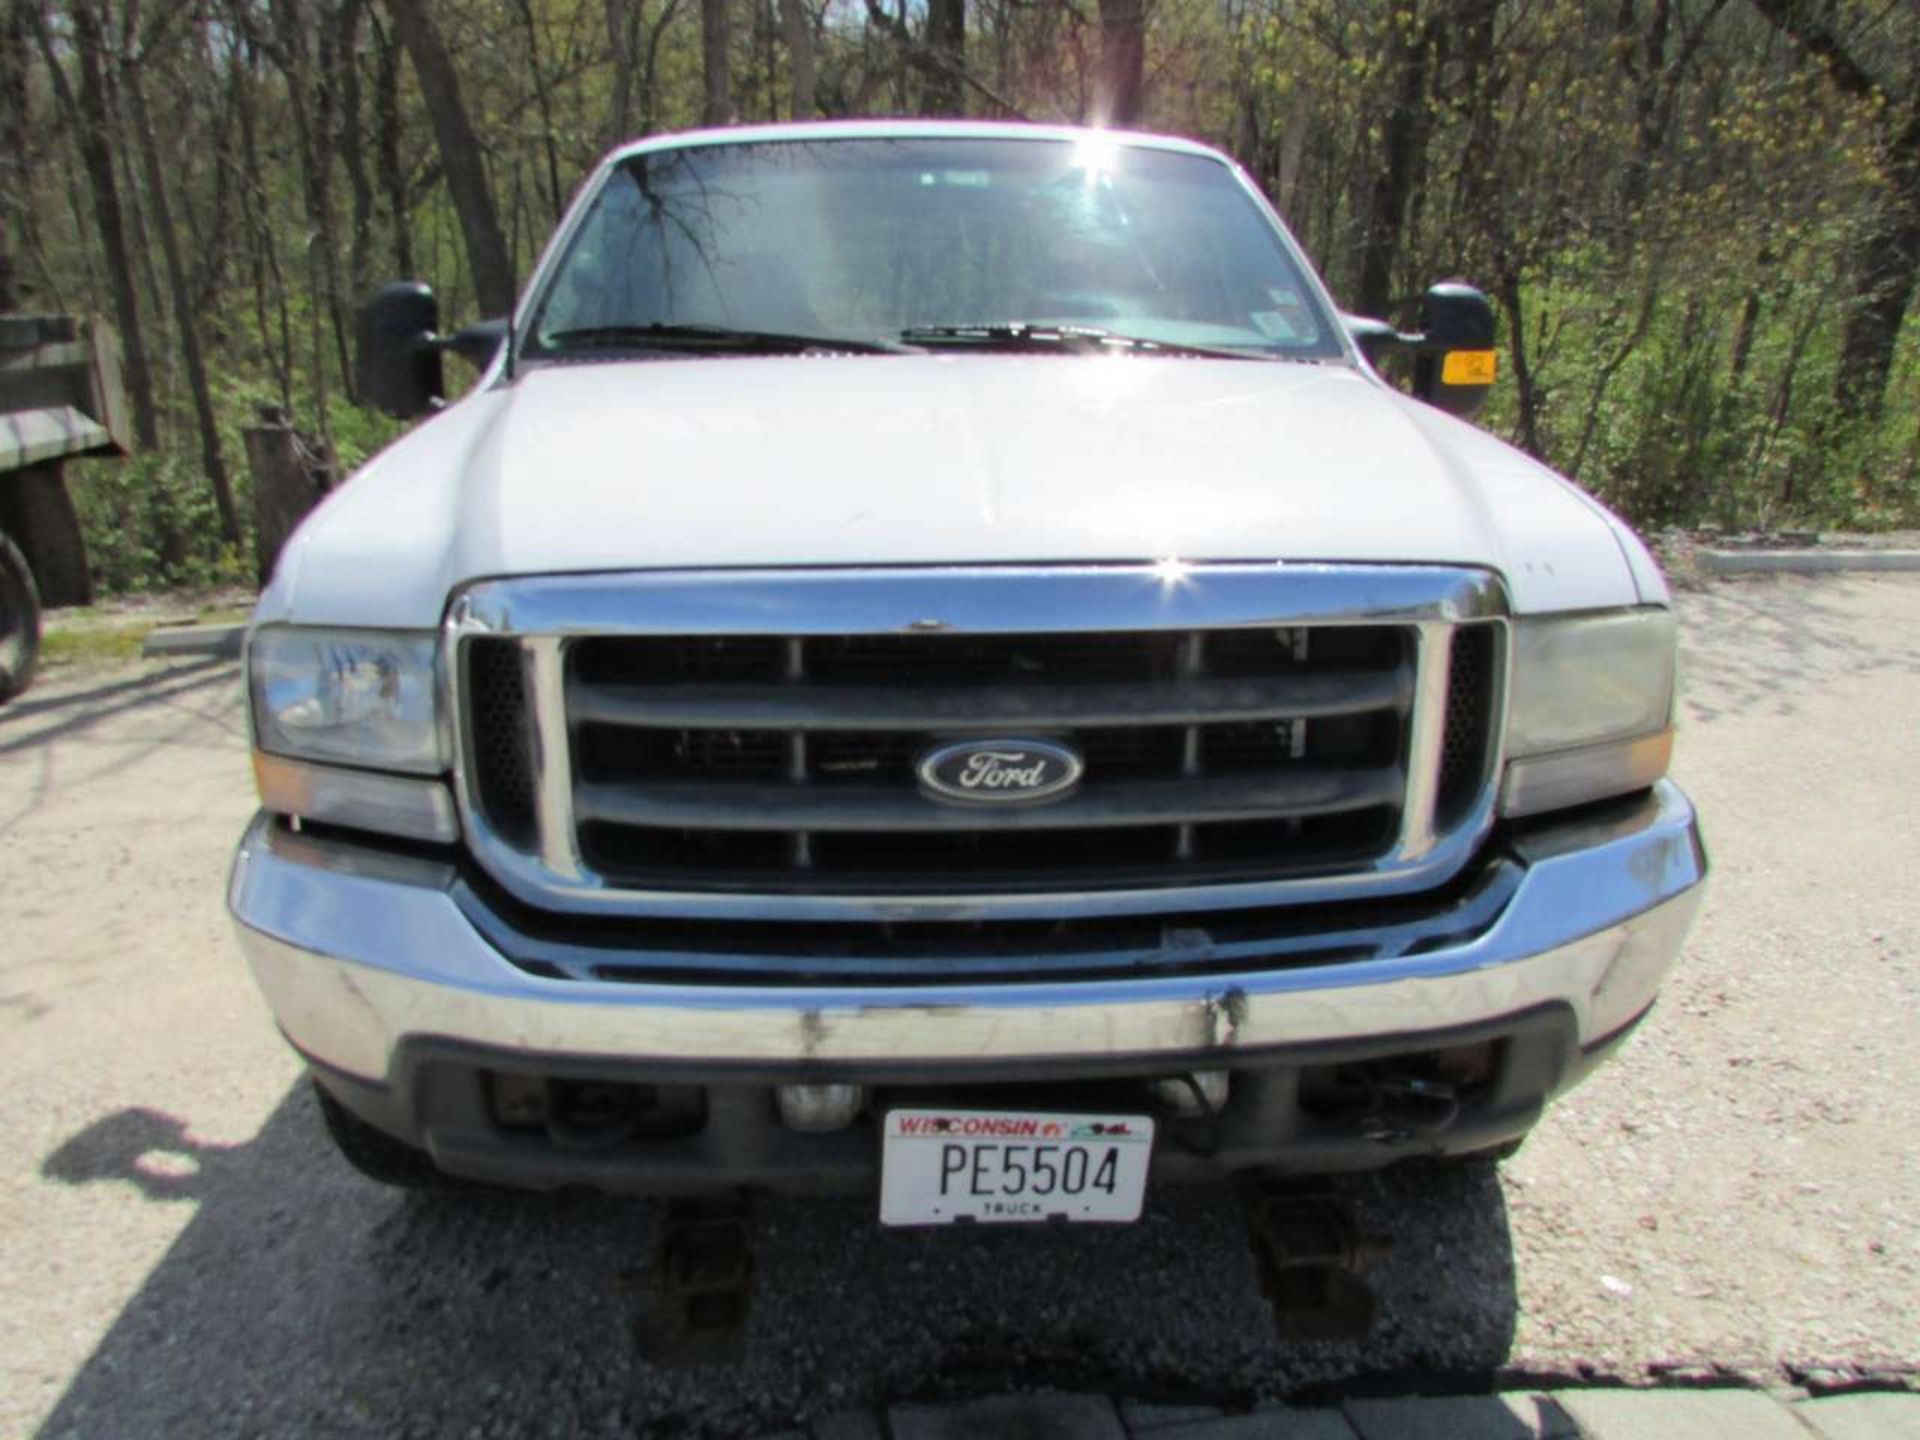 2002 Ford F-250XLT Super Duty Pickup Truck - Image 2 of 17